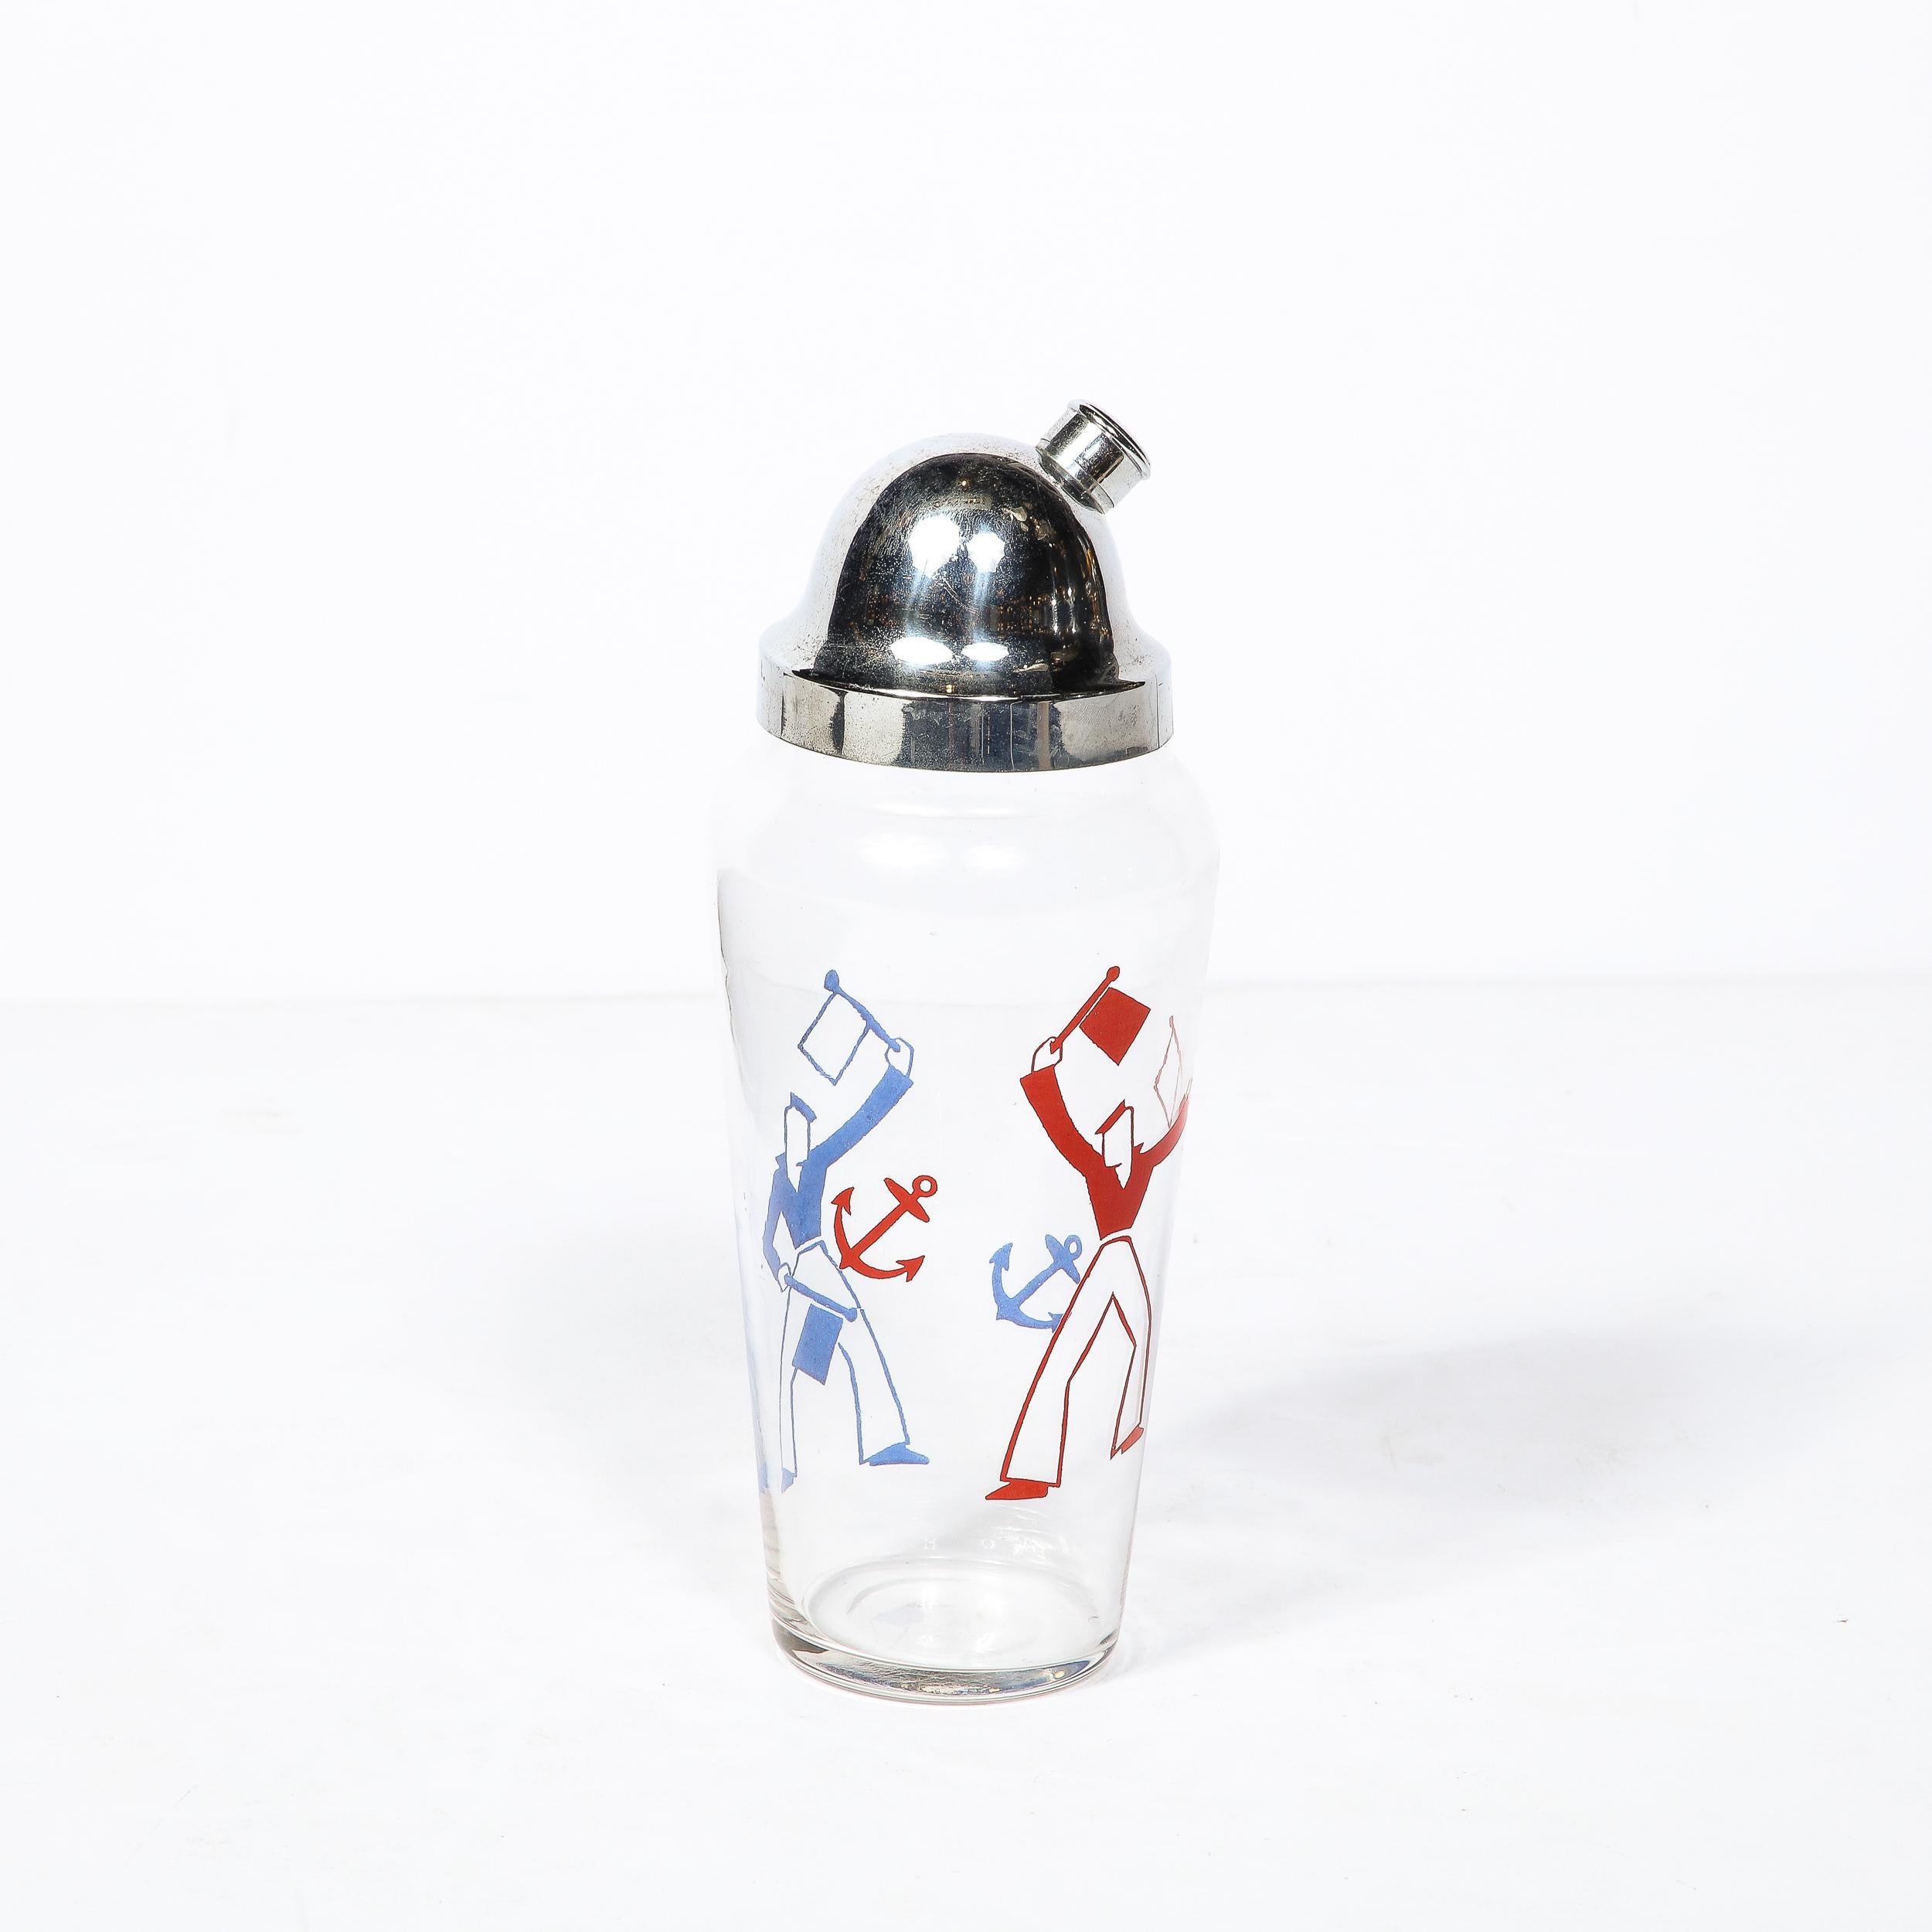 Mid-20th Century Art Deco Whimsical Cocktail Shaker in Chrome with Sailors in Red and Blue 